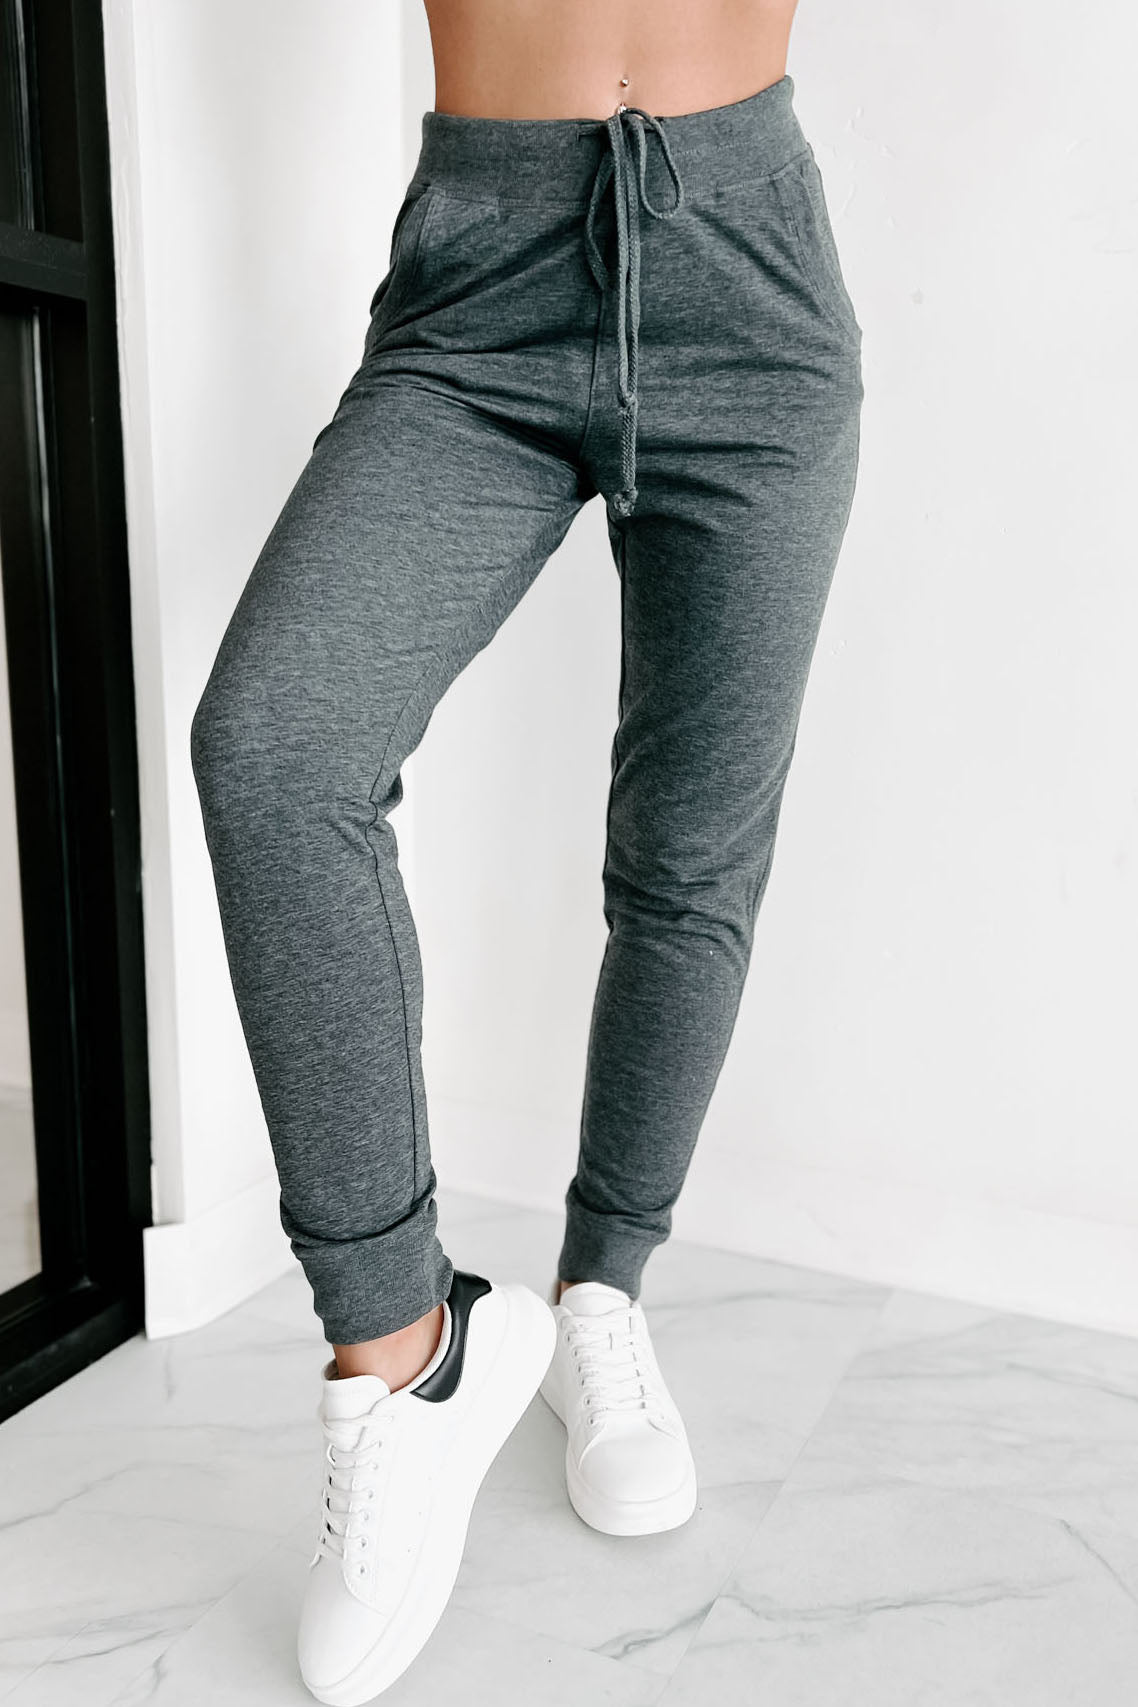 Tear Up This Town Hooded Top & Joggers Two-Piece Set (Grey) - NanaMacs